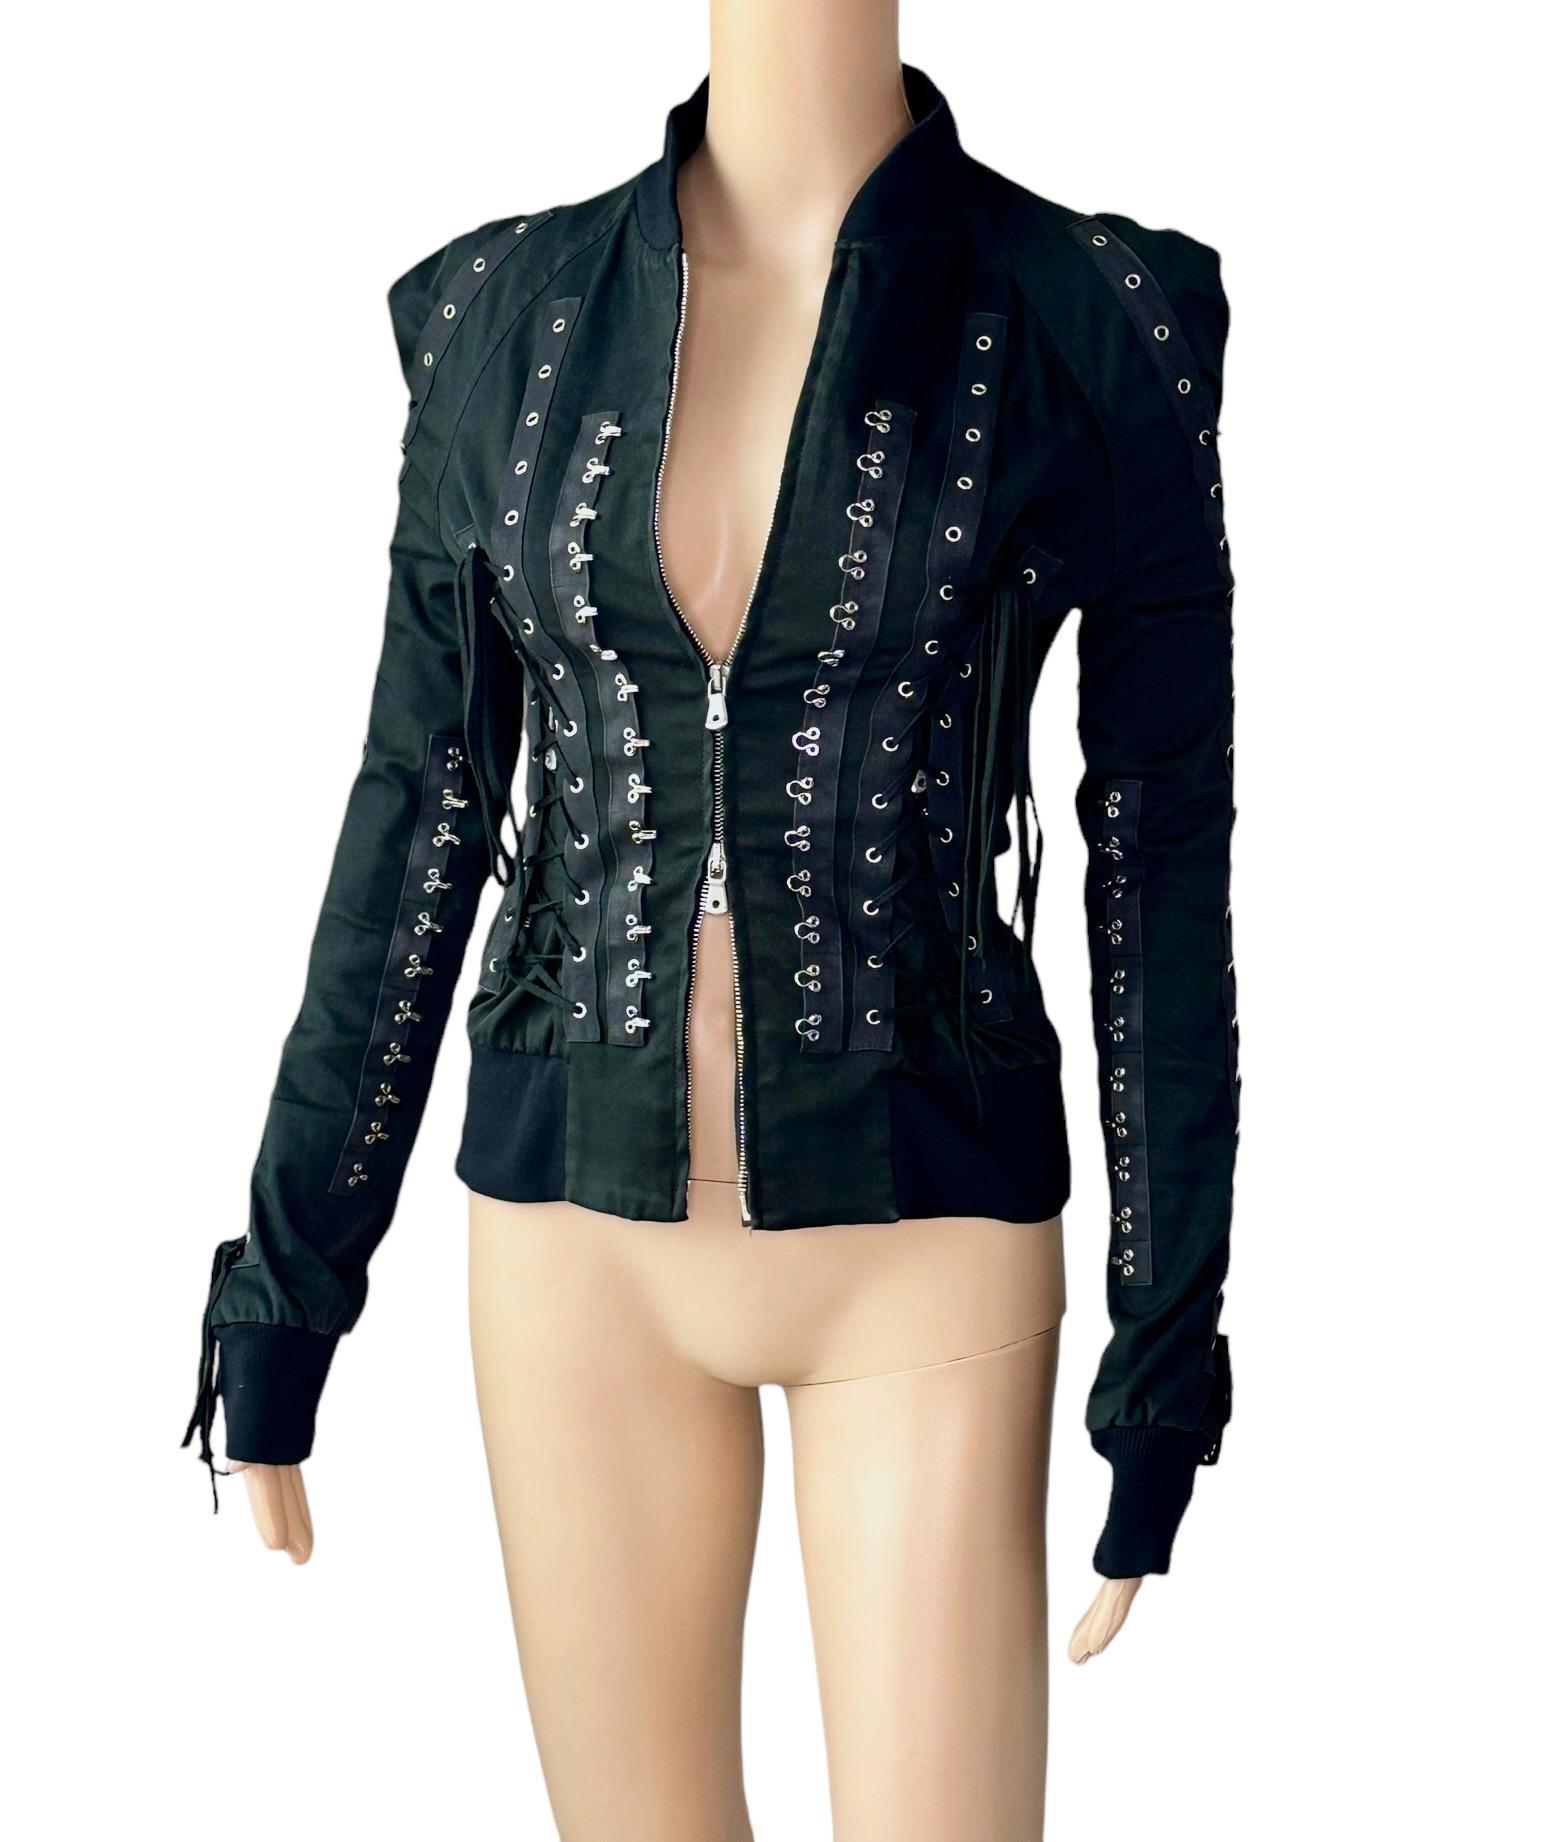 Dolce & Gabbana F/W 2003 Corset Lace Up Hook and Eye Black Top Jacket For Sale 5